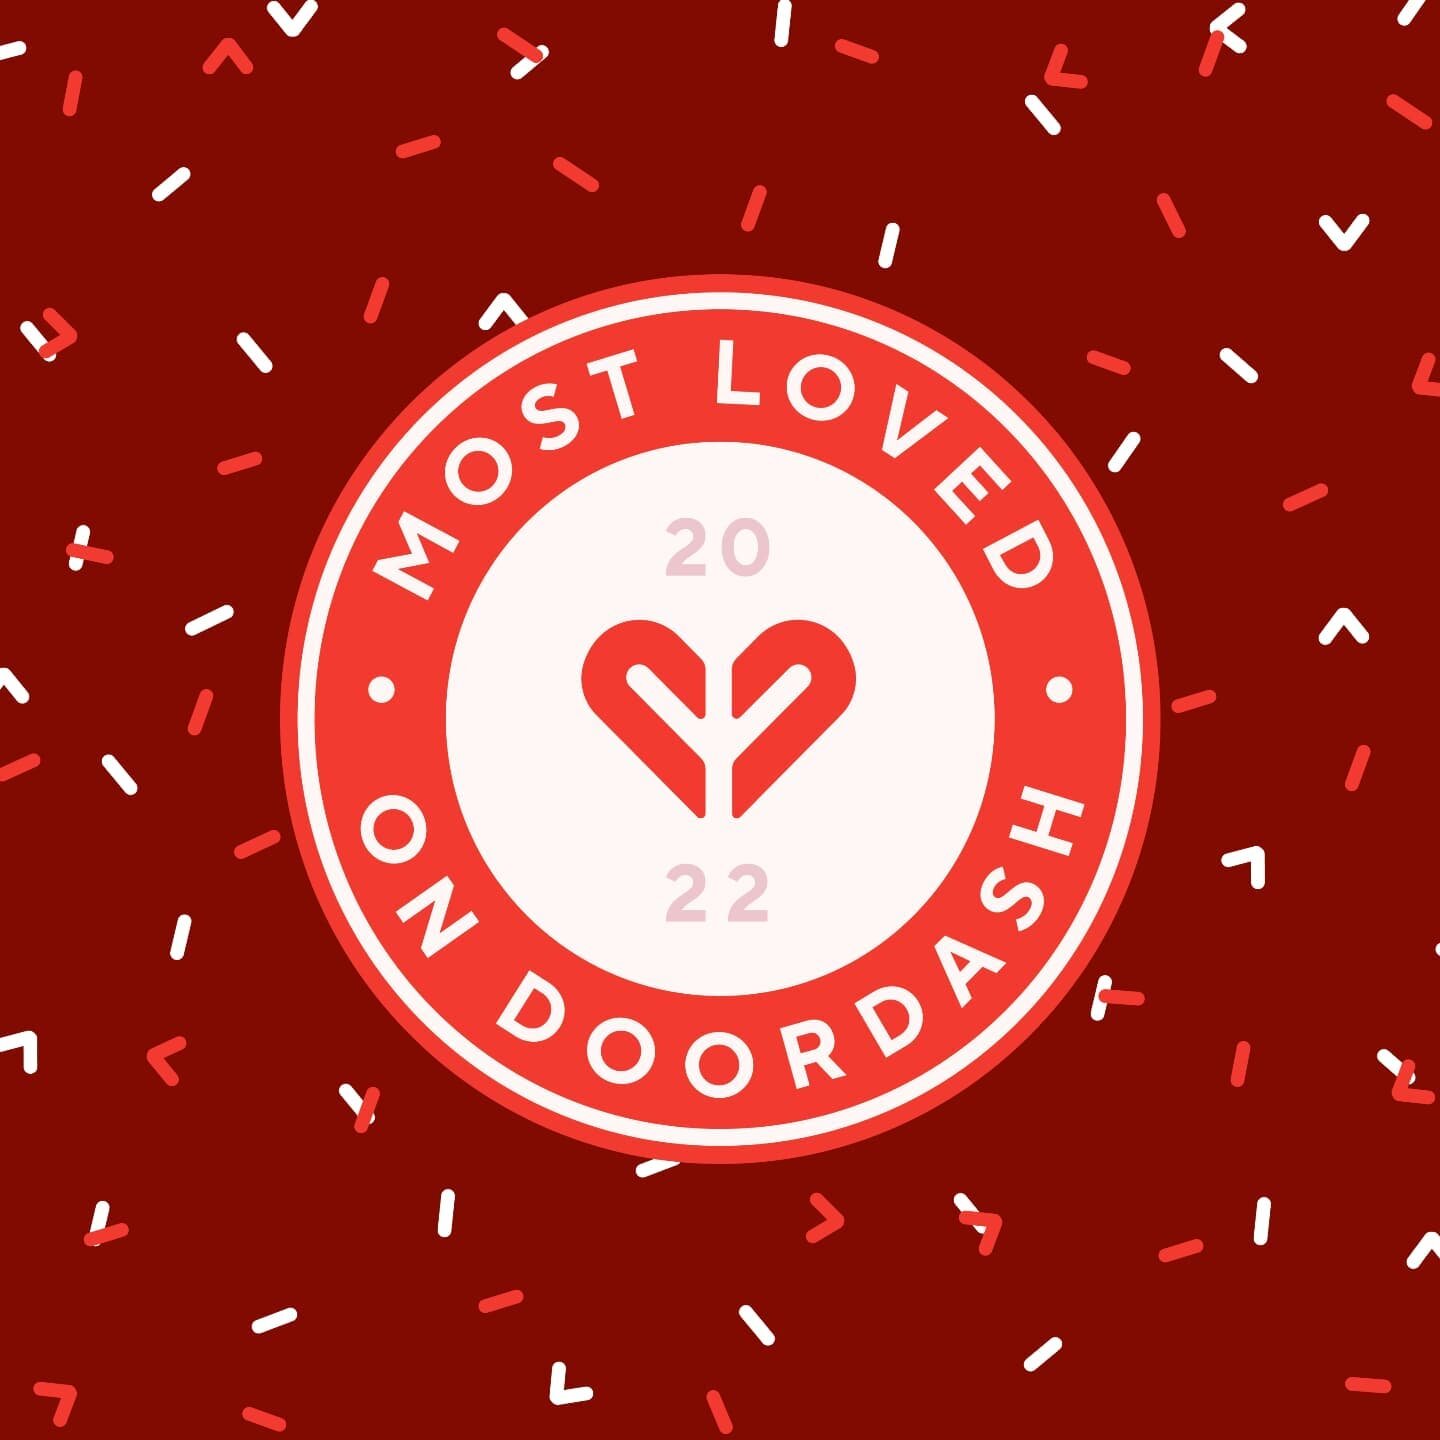 Yay! We are most loved on @doordash .
Thanks to all the customers and hardworking #dashers ! 🍗👍🍗

#mostloved
#doordash #delivery #japanesefood #japaneserestaurant